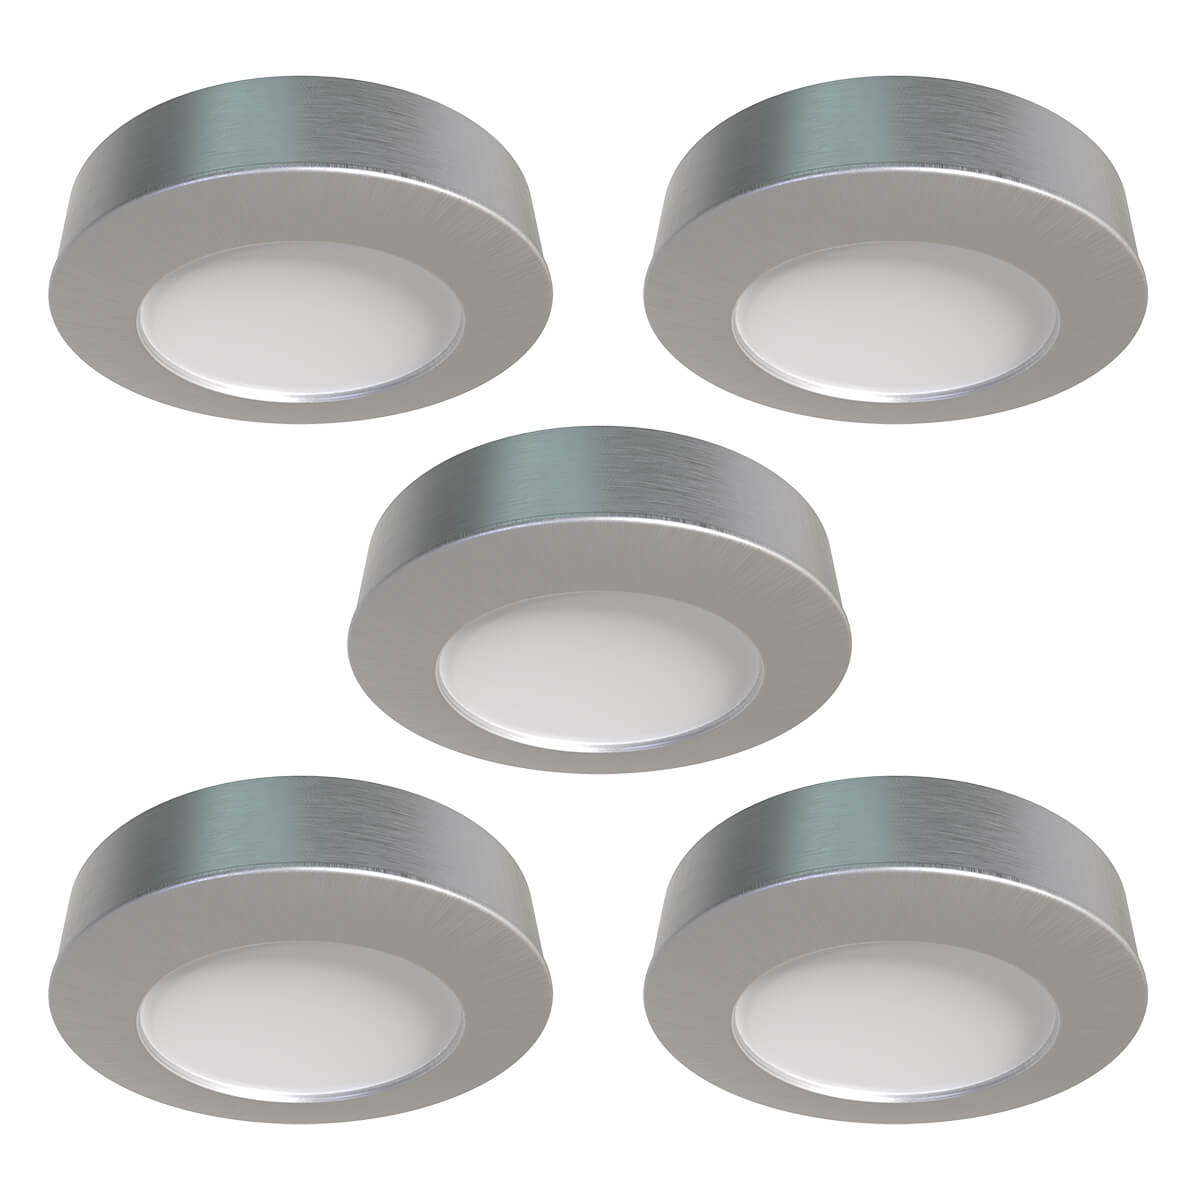 View 5 x 230v Brushed Chrome SurfaceRecessed Mounted UnderCabinet Lights information